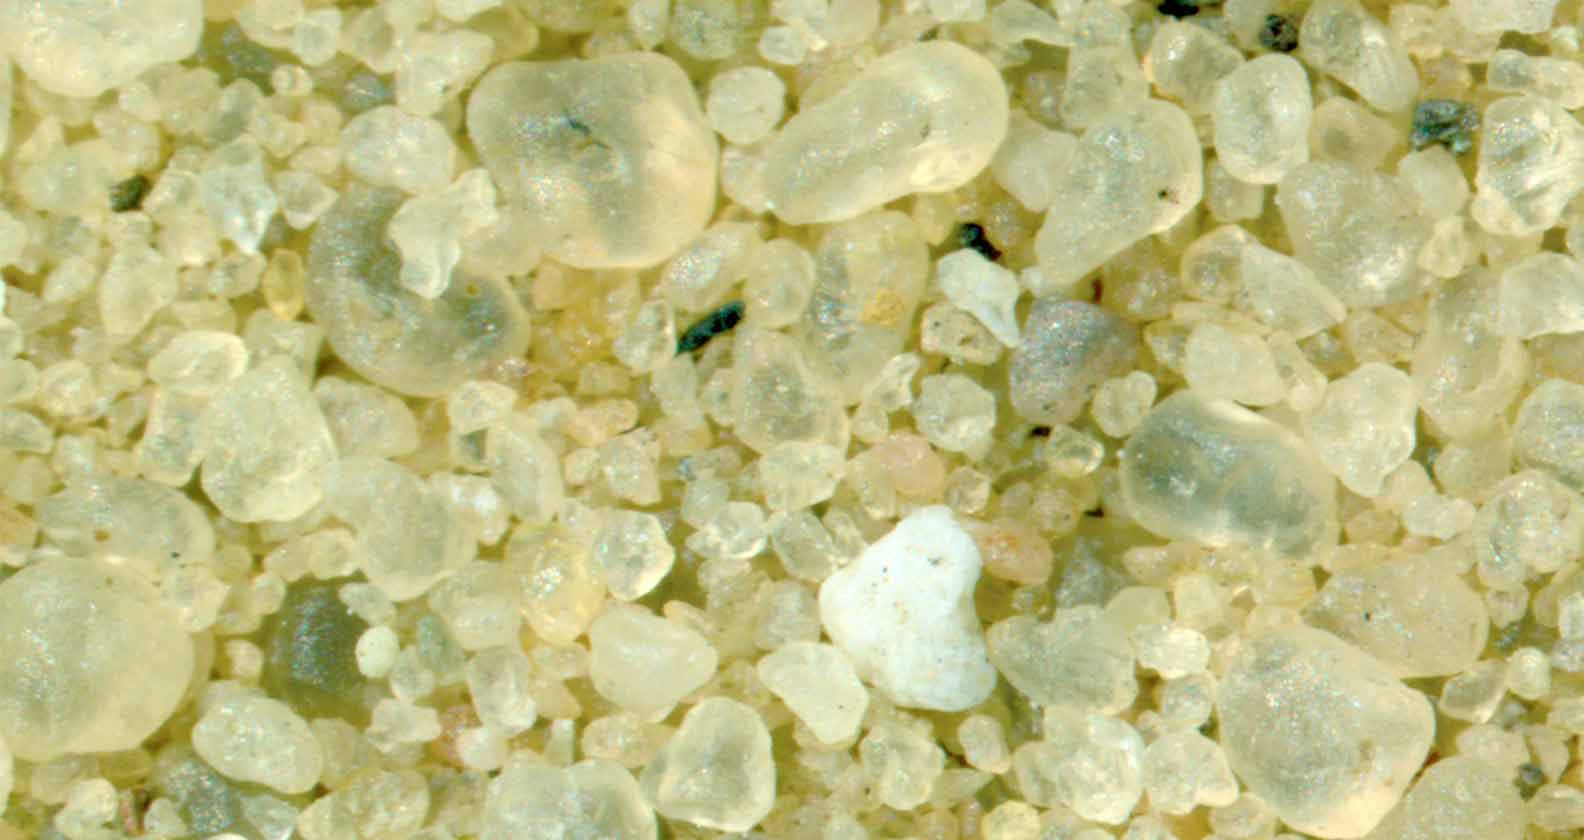 Image for Curtin planetary scientist unravels mystery of Egyptian desert glass